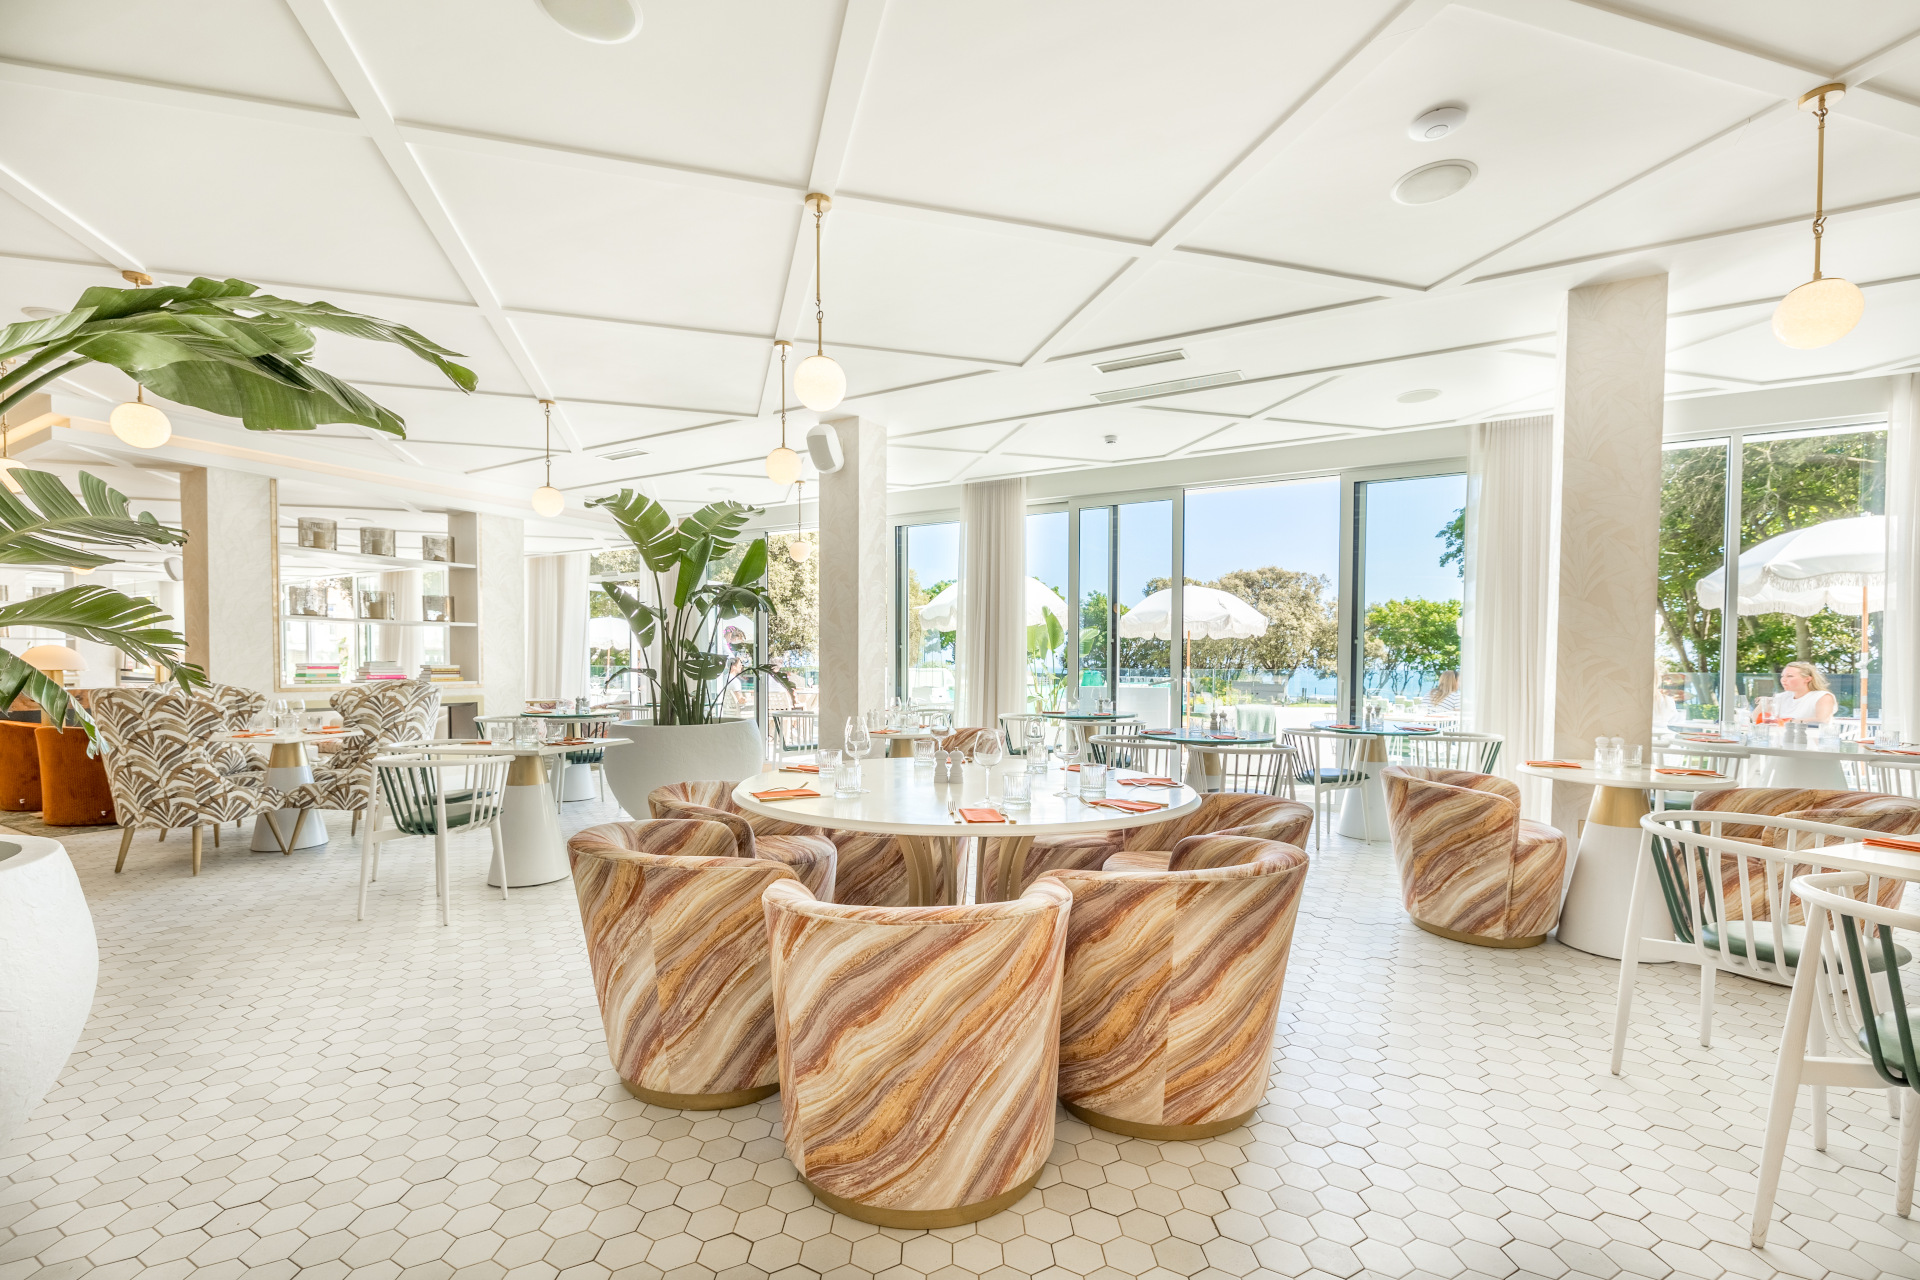 The Nici restaurant & Terrace with light, white interiors in a large room and chairs with swirls round table